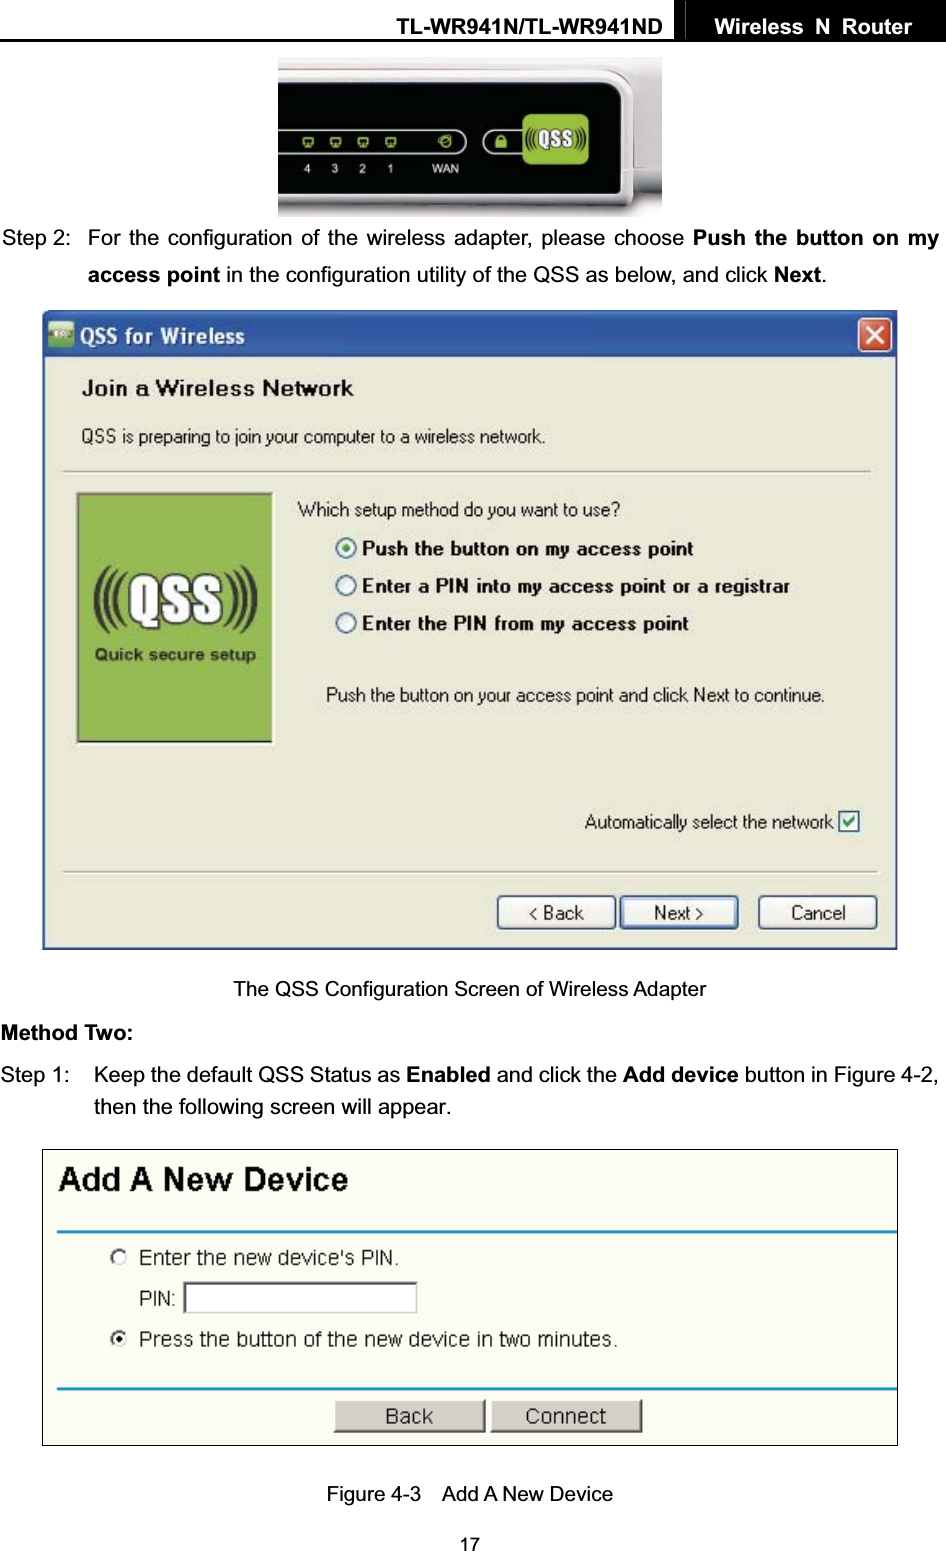 TL-WR941N/TL-WR941ND  Wireless N Router  17Step 2:  For the configuration of the wireless adapter, please choose Push the button on my access point in the configuration utility of the QSS as below, and click Next.The QSS Configuration Screen of Wireless Adapter Method Two: Step 1:  Keep the default QSS Status as Enabled and click the Add device button in Figure 4-2, then the following screen will appear. Figure 4-3    Add A New Device 